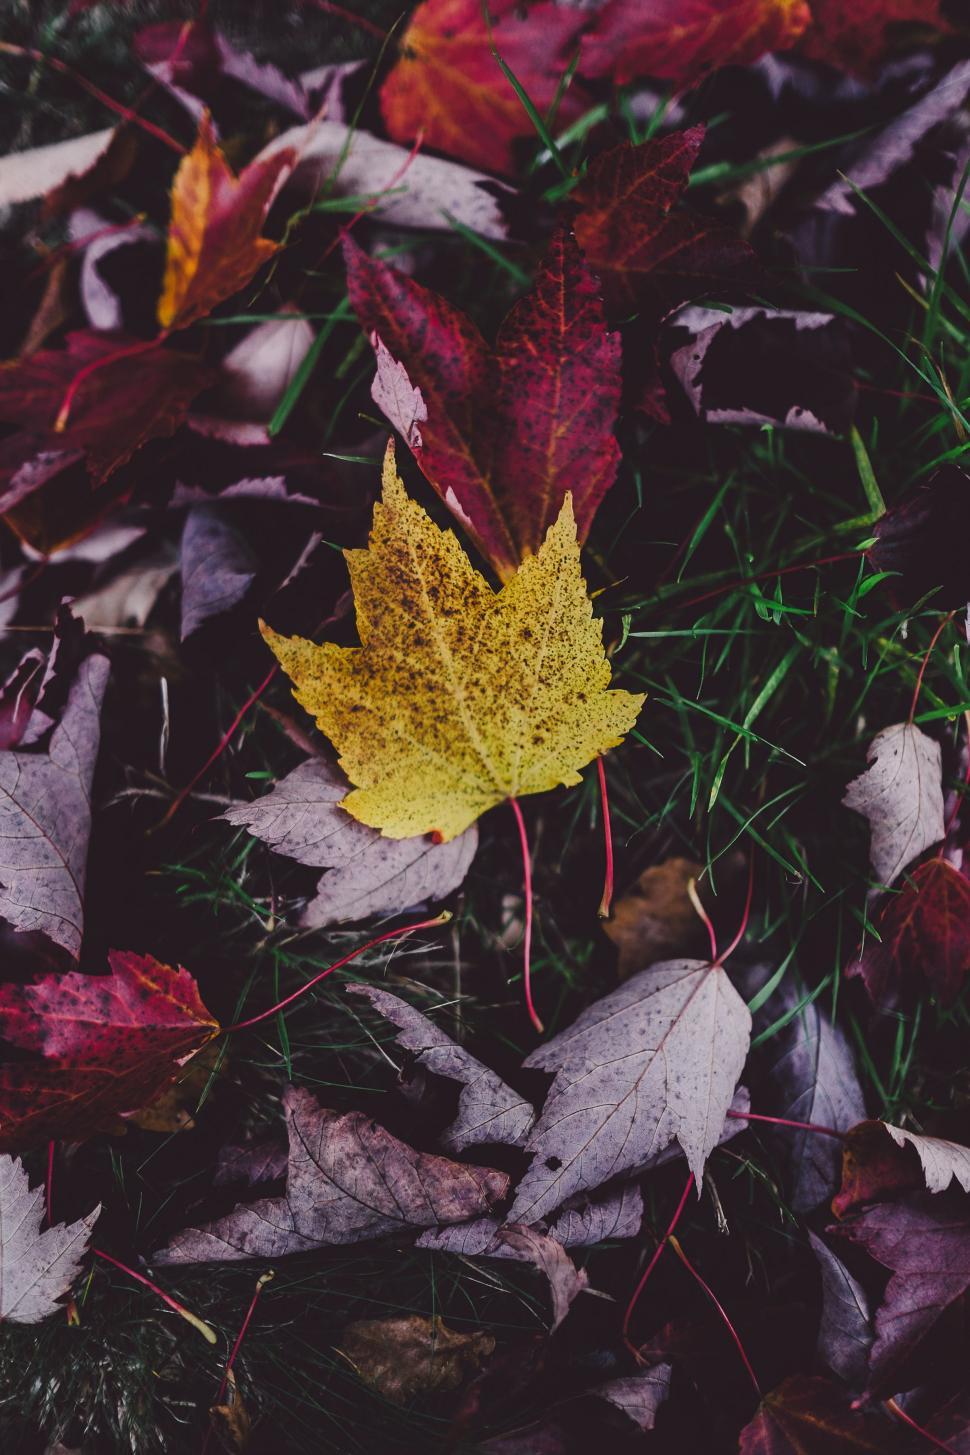 Free Image of Yellow Leaf Resting on Pile of Leaves 